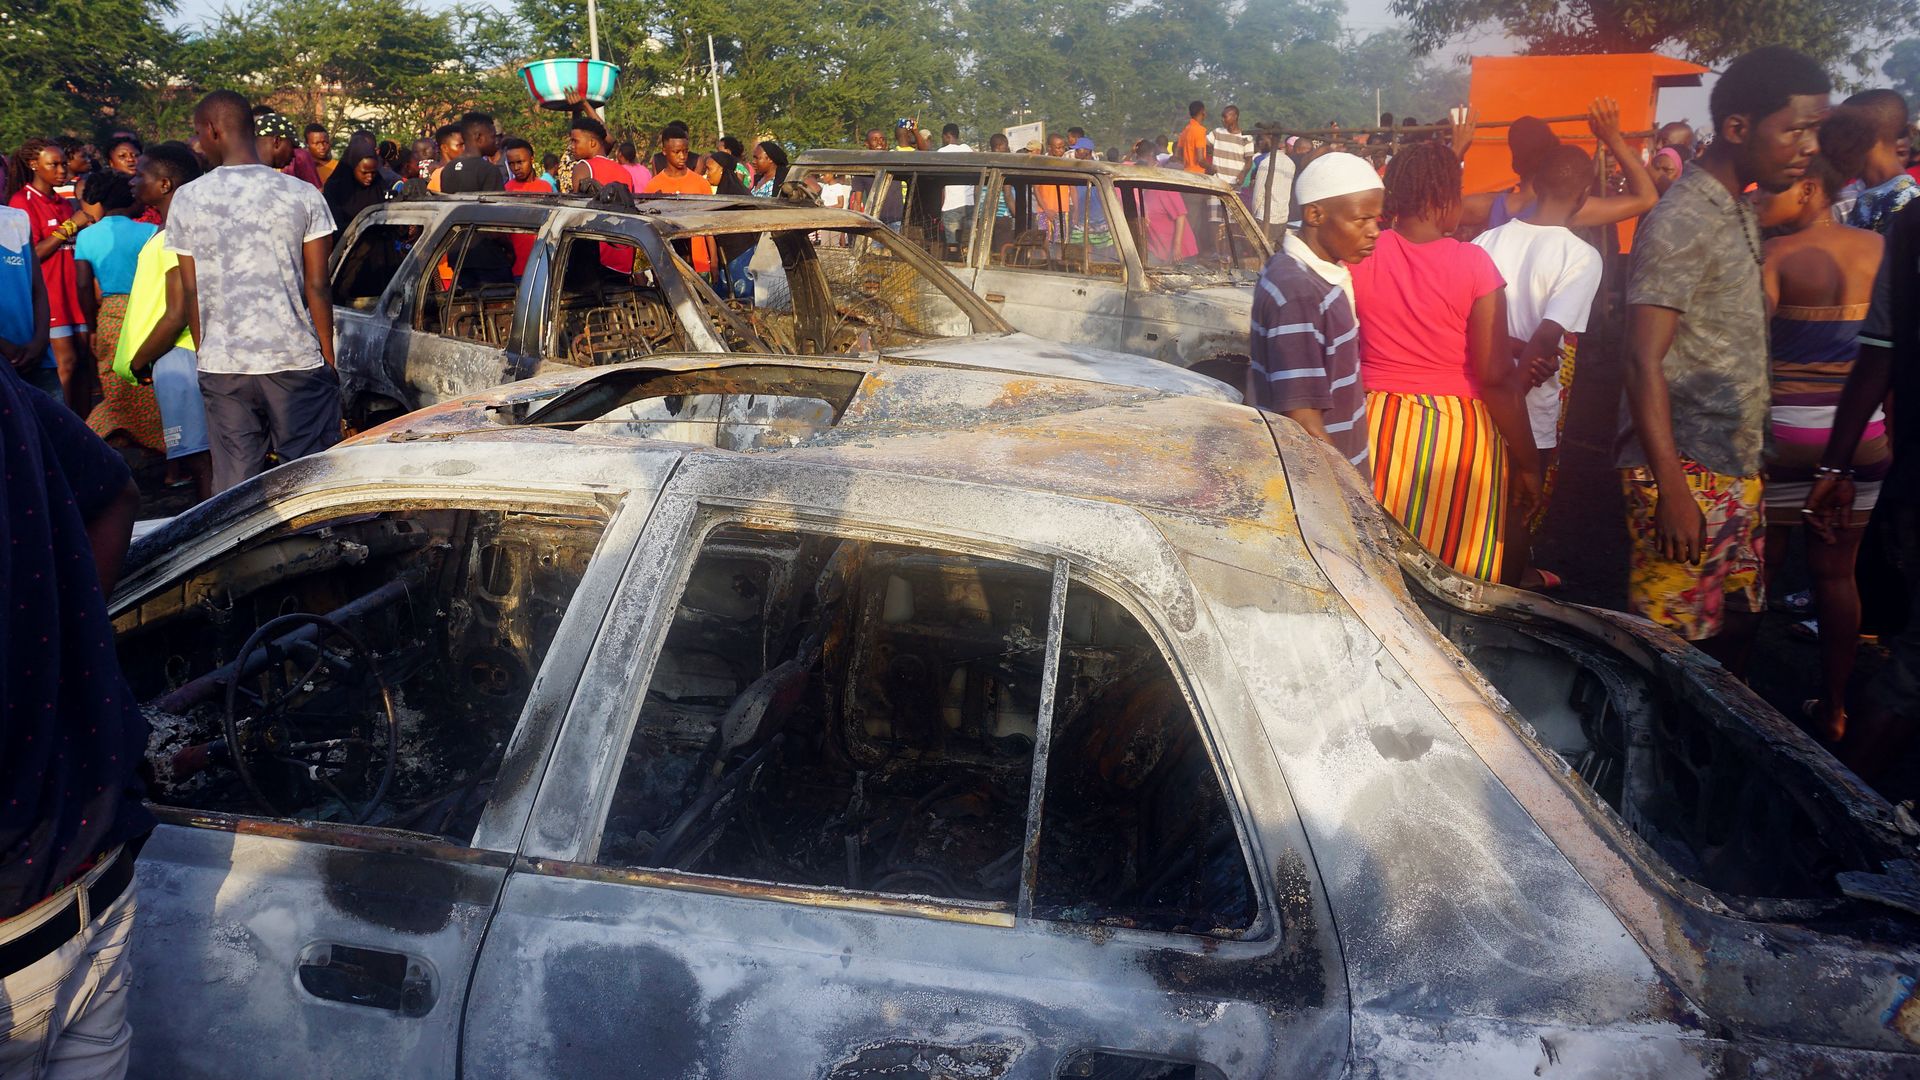 People look on at burnt cars in the aftermath of a fuel tanker explosion in Freetown on November 6,